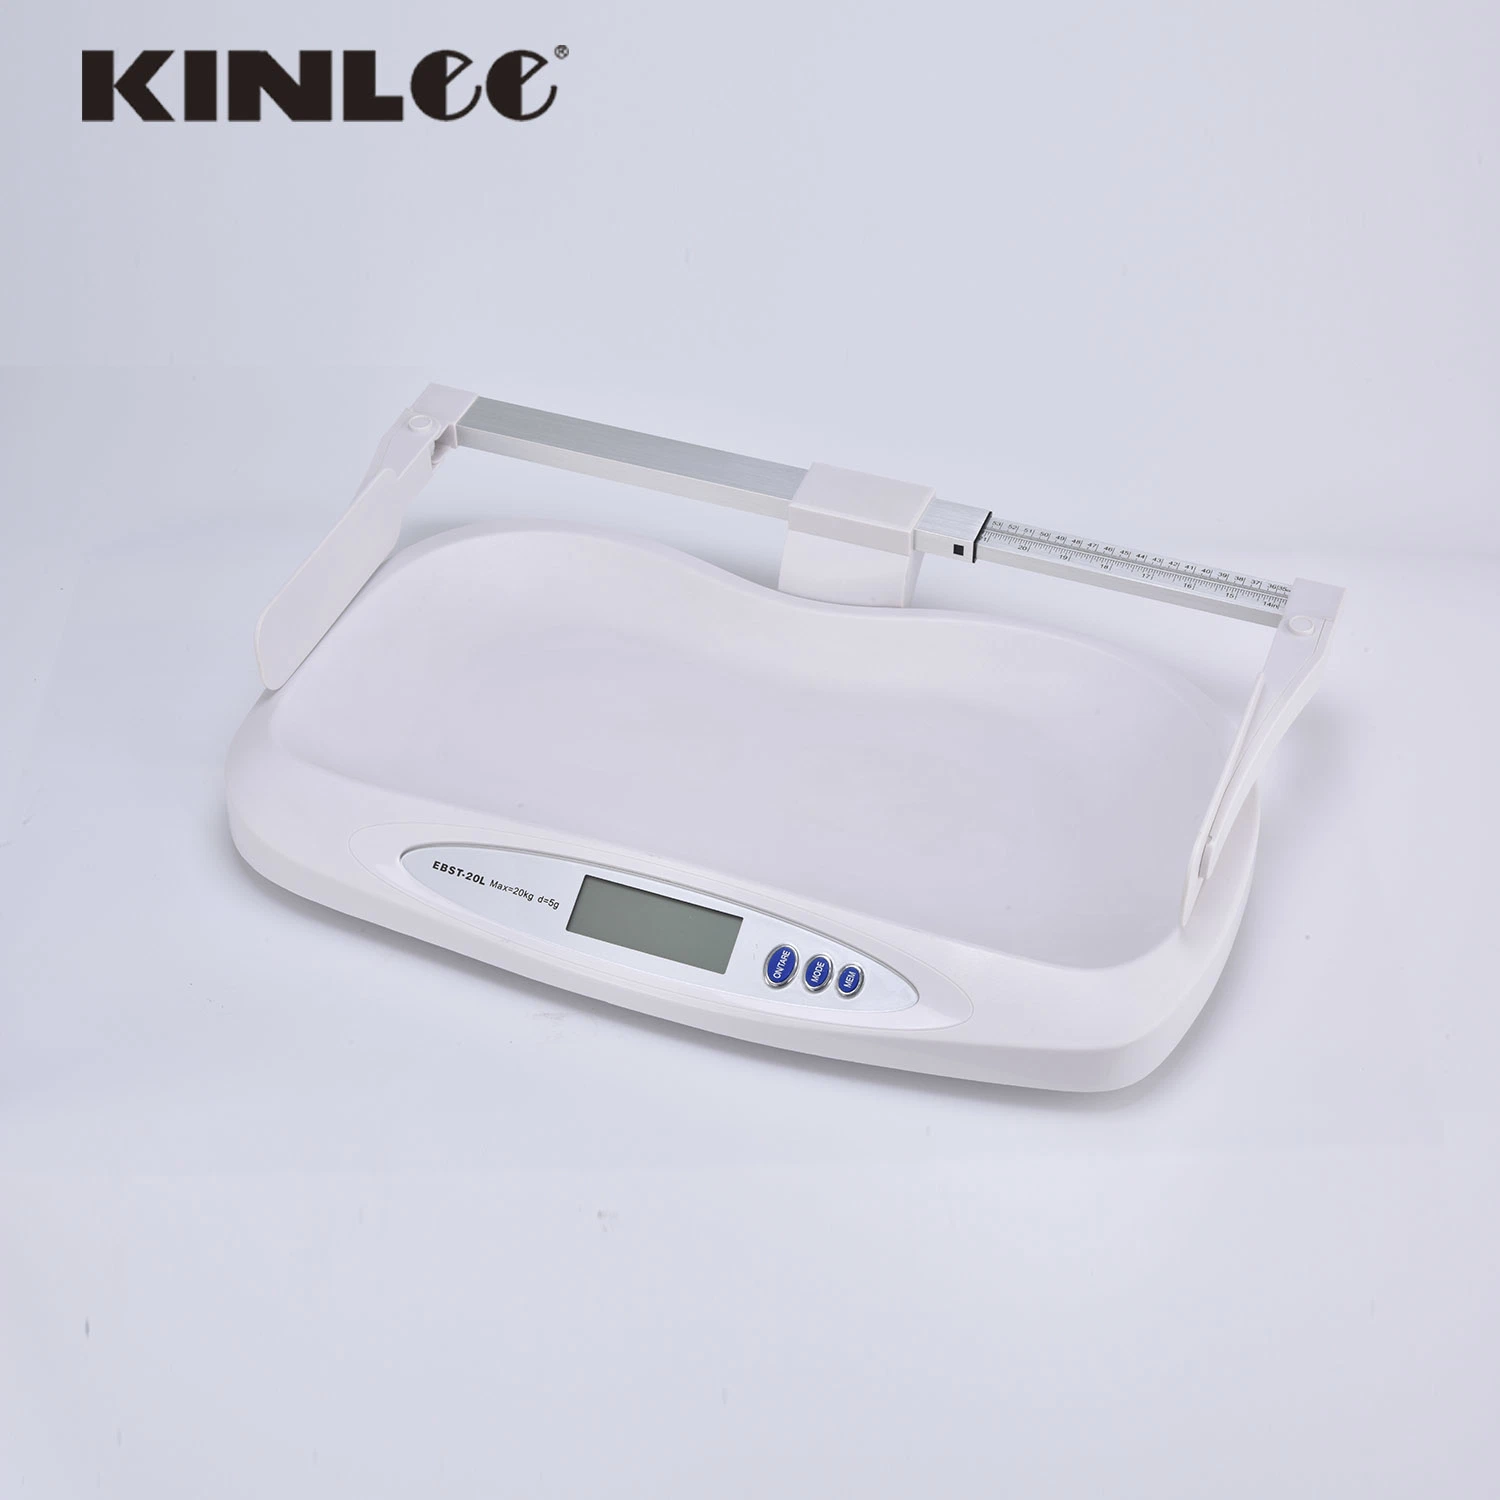 Ebst-20L Kinlee Digital Electronic Household Baby Infant Height Measurement Weighing Balance 20kg Scale Basic Customization